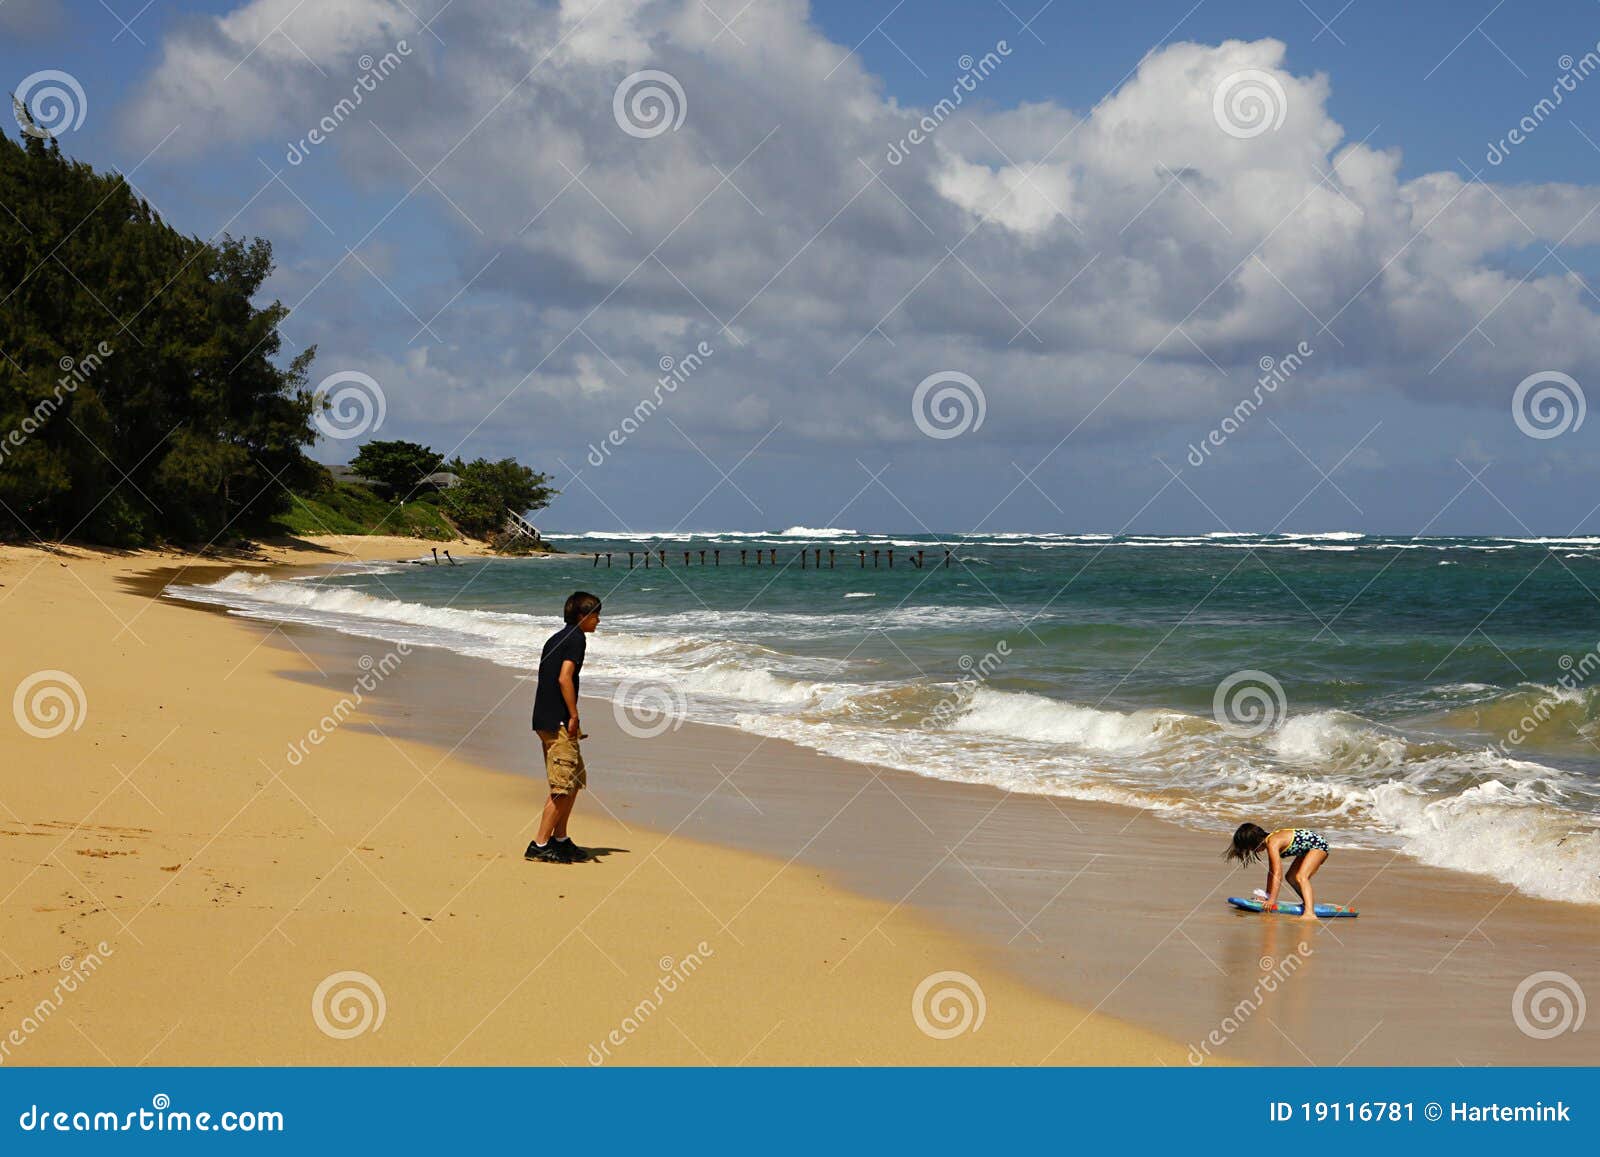 unspoiled north shore beach in oahu, hawaii